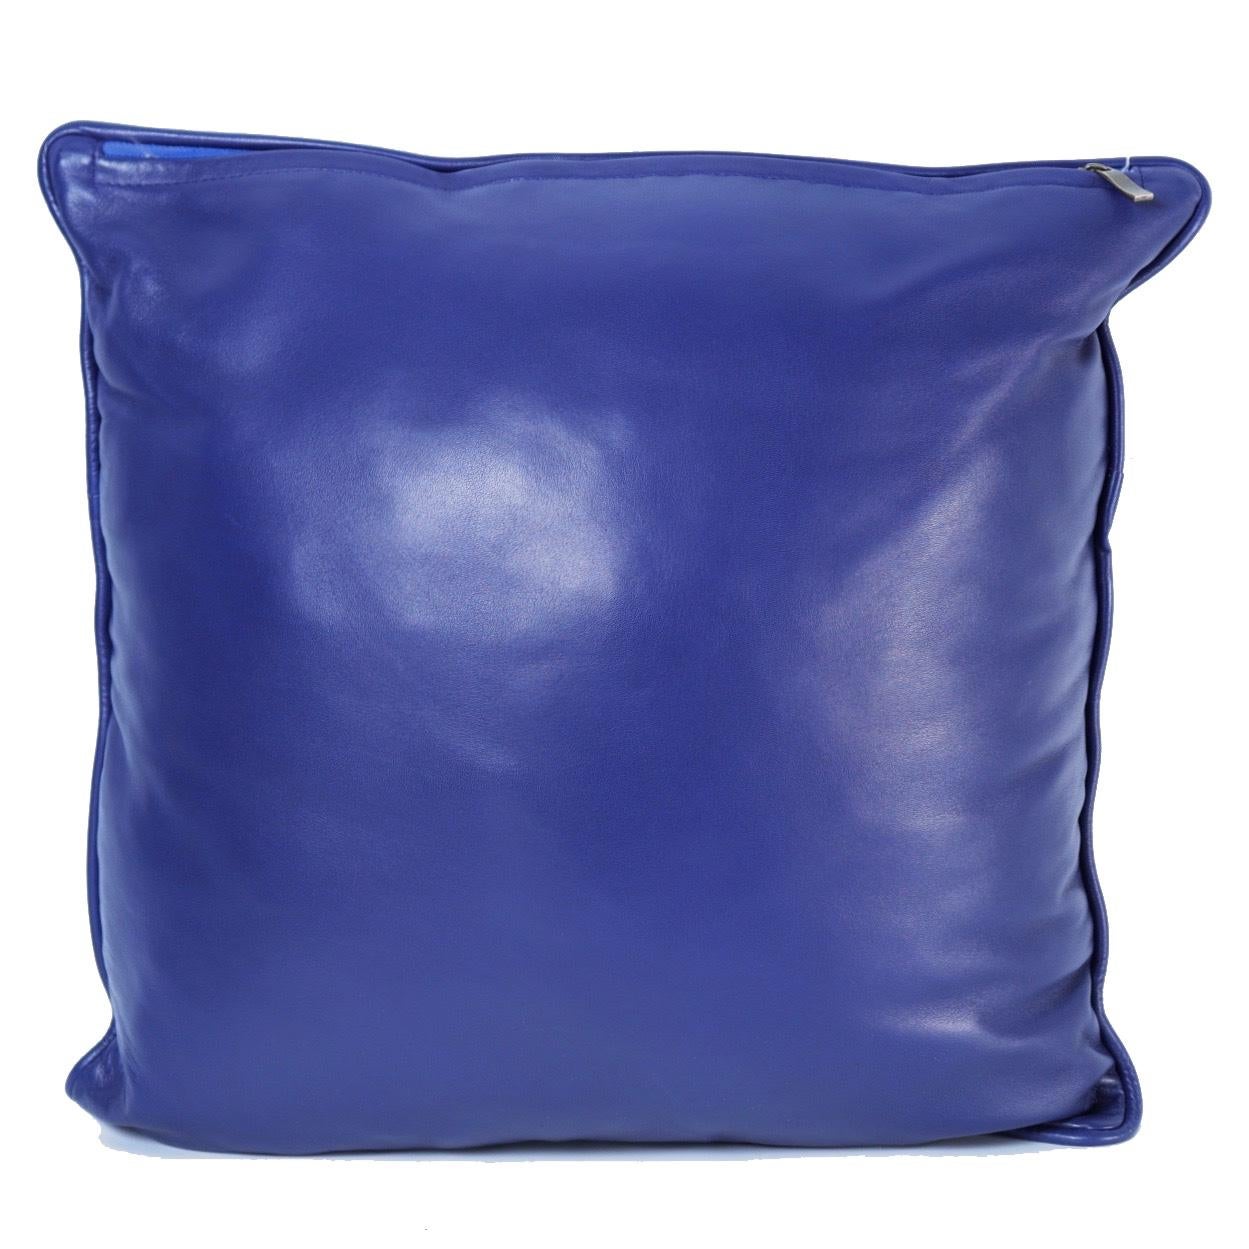 Moroccan embroidered leather pillow, uniquely designed for the Jardin Majorelle in Marrakech, replicating the intense Majorelle blue that has made the garden famous, using Moroccan craftsmen to replicate the unusual tri-arrow interlocking pattern